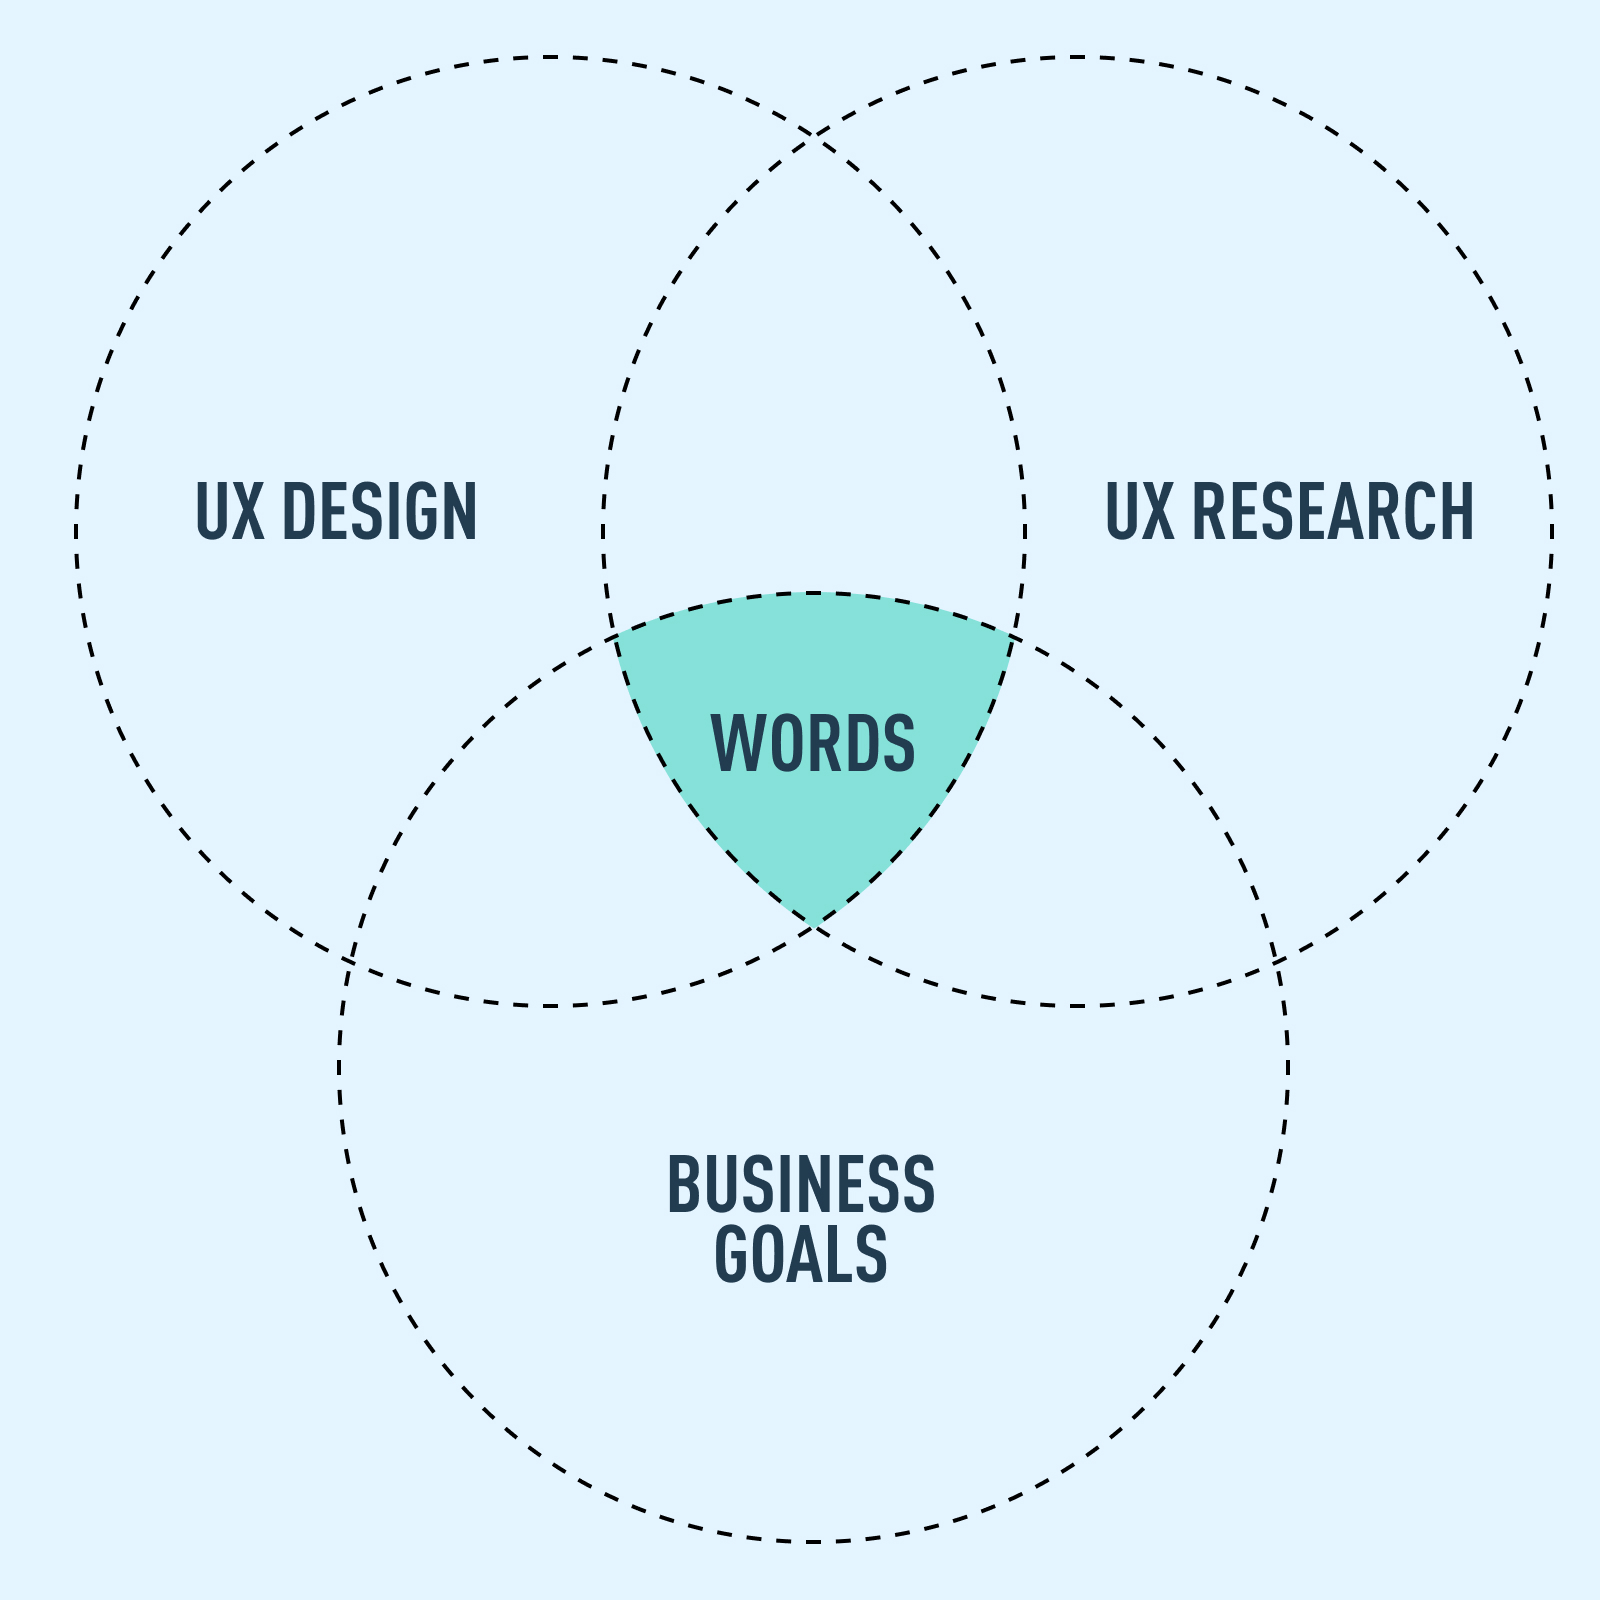 Venn diagram illustrating "words" at the intersection of three circles labeled "UX Design," "UX Research," and "Business Goals